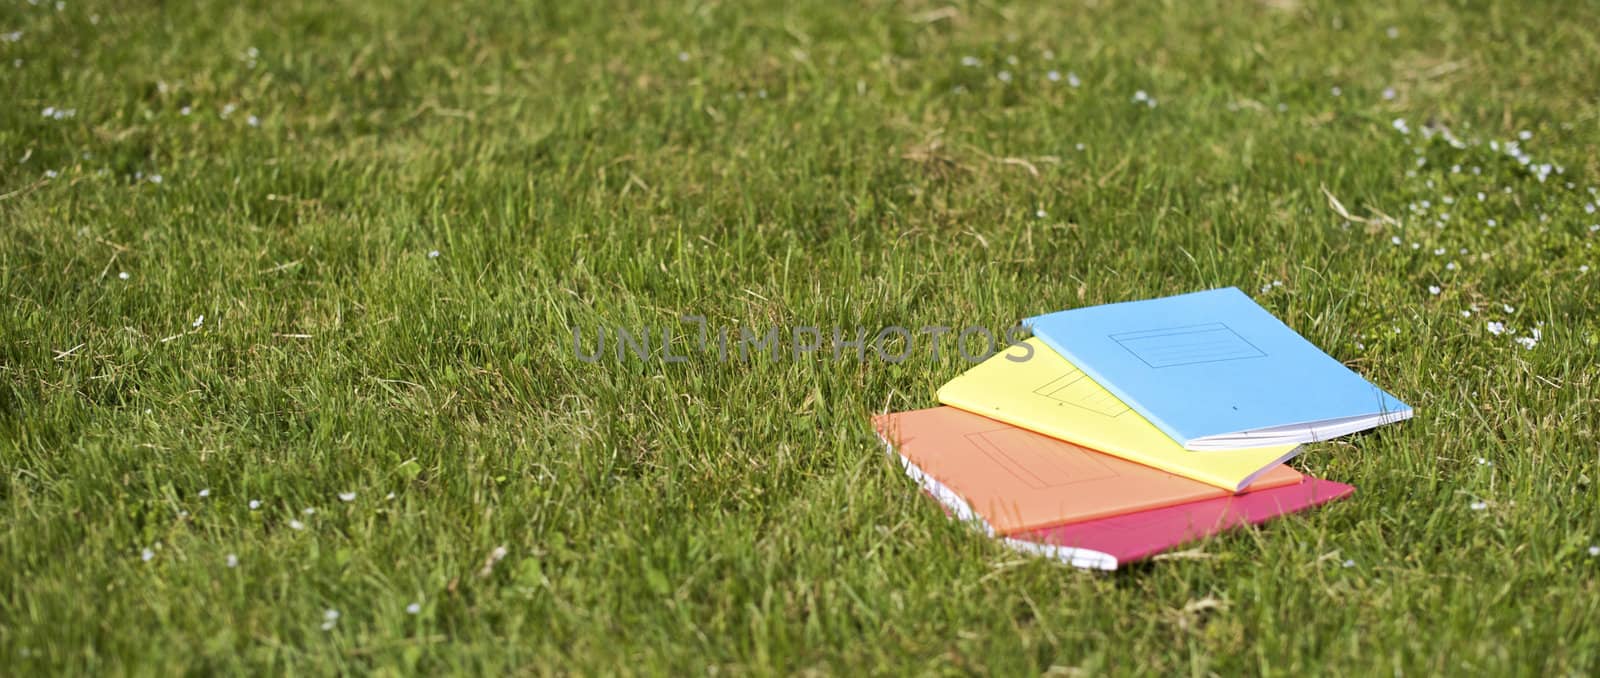 Books on the grass for a summer studies